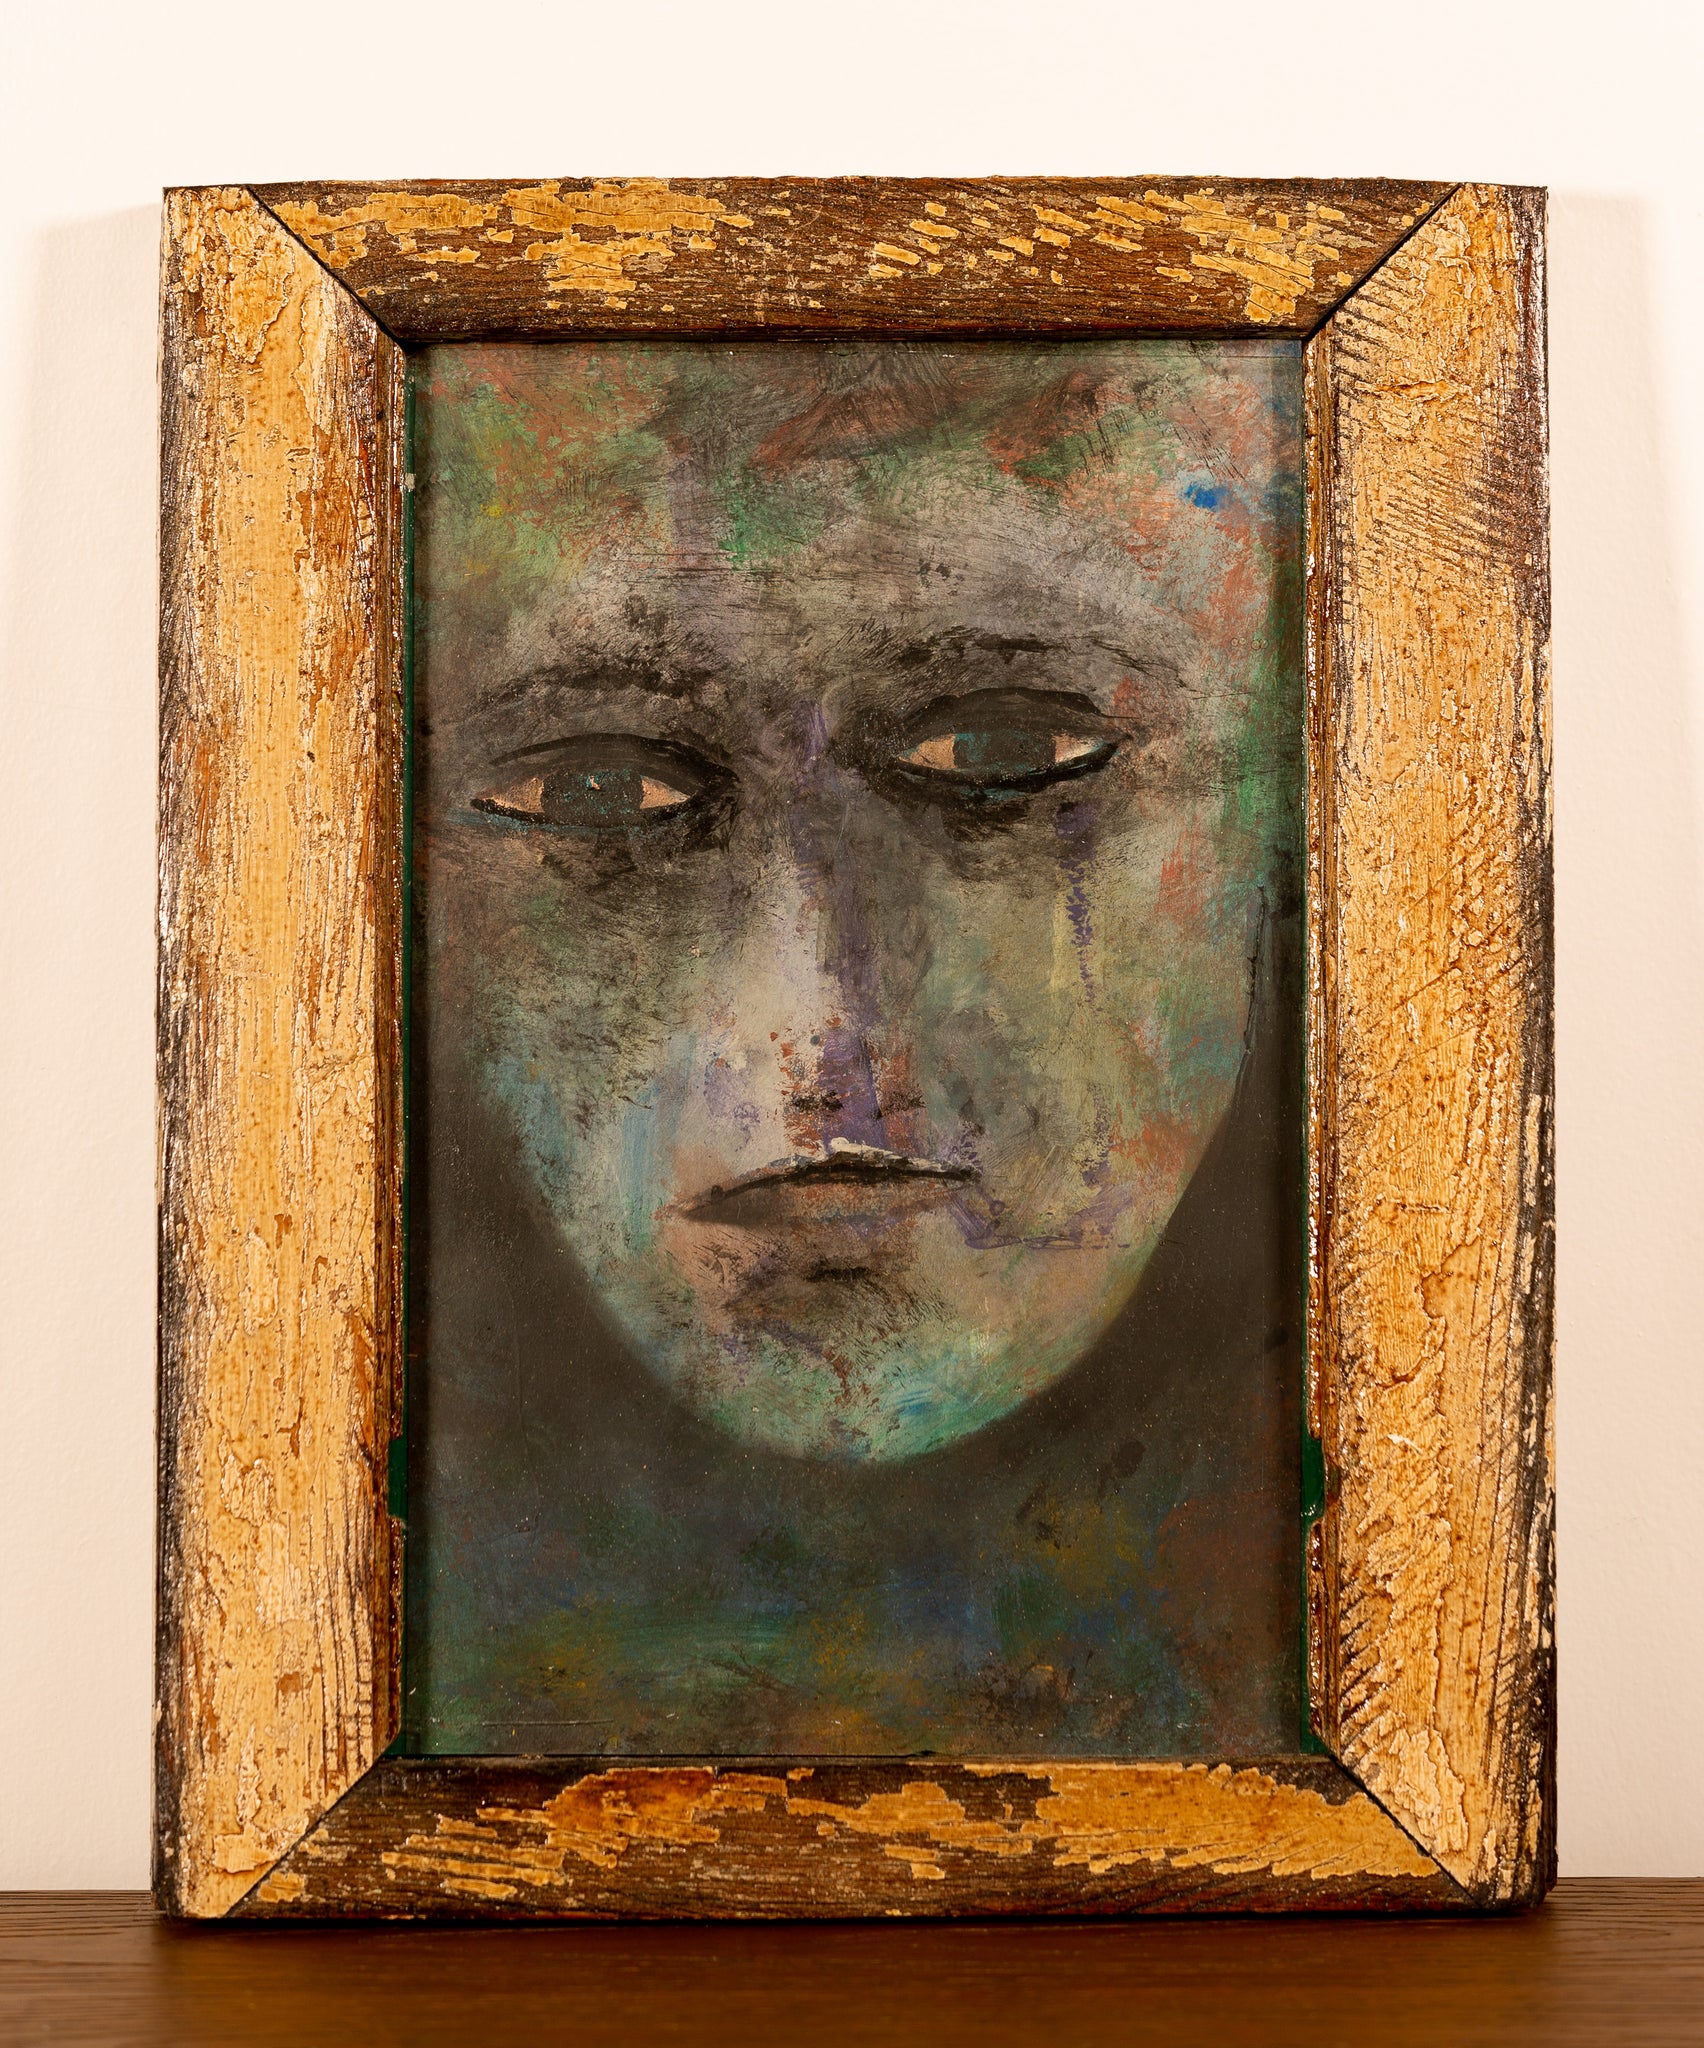 Rustic Wood Framed Face - Red Bank Artisan Collective jewelry art vintage recycled Artwork, Steve Schiro